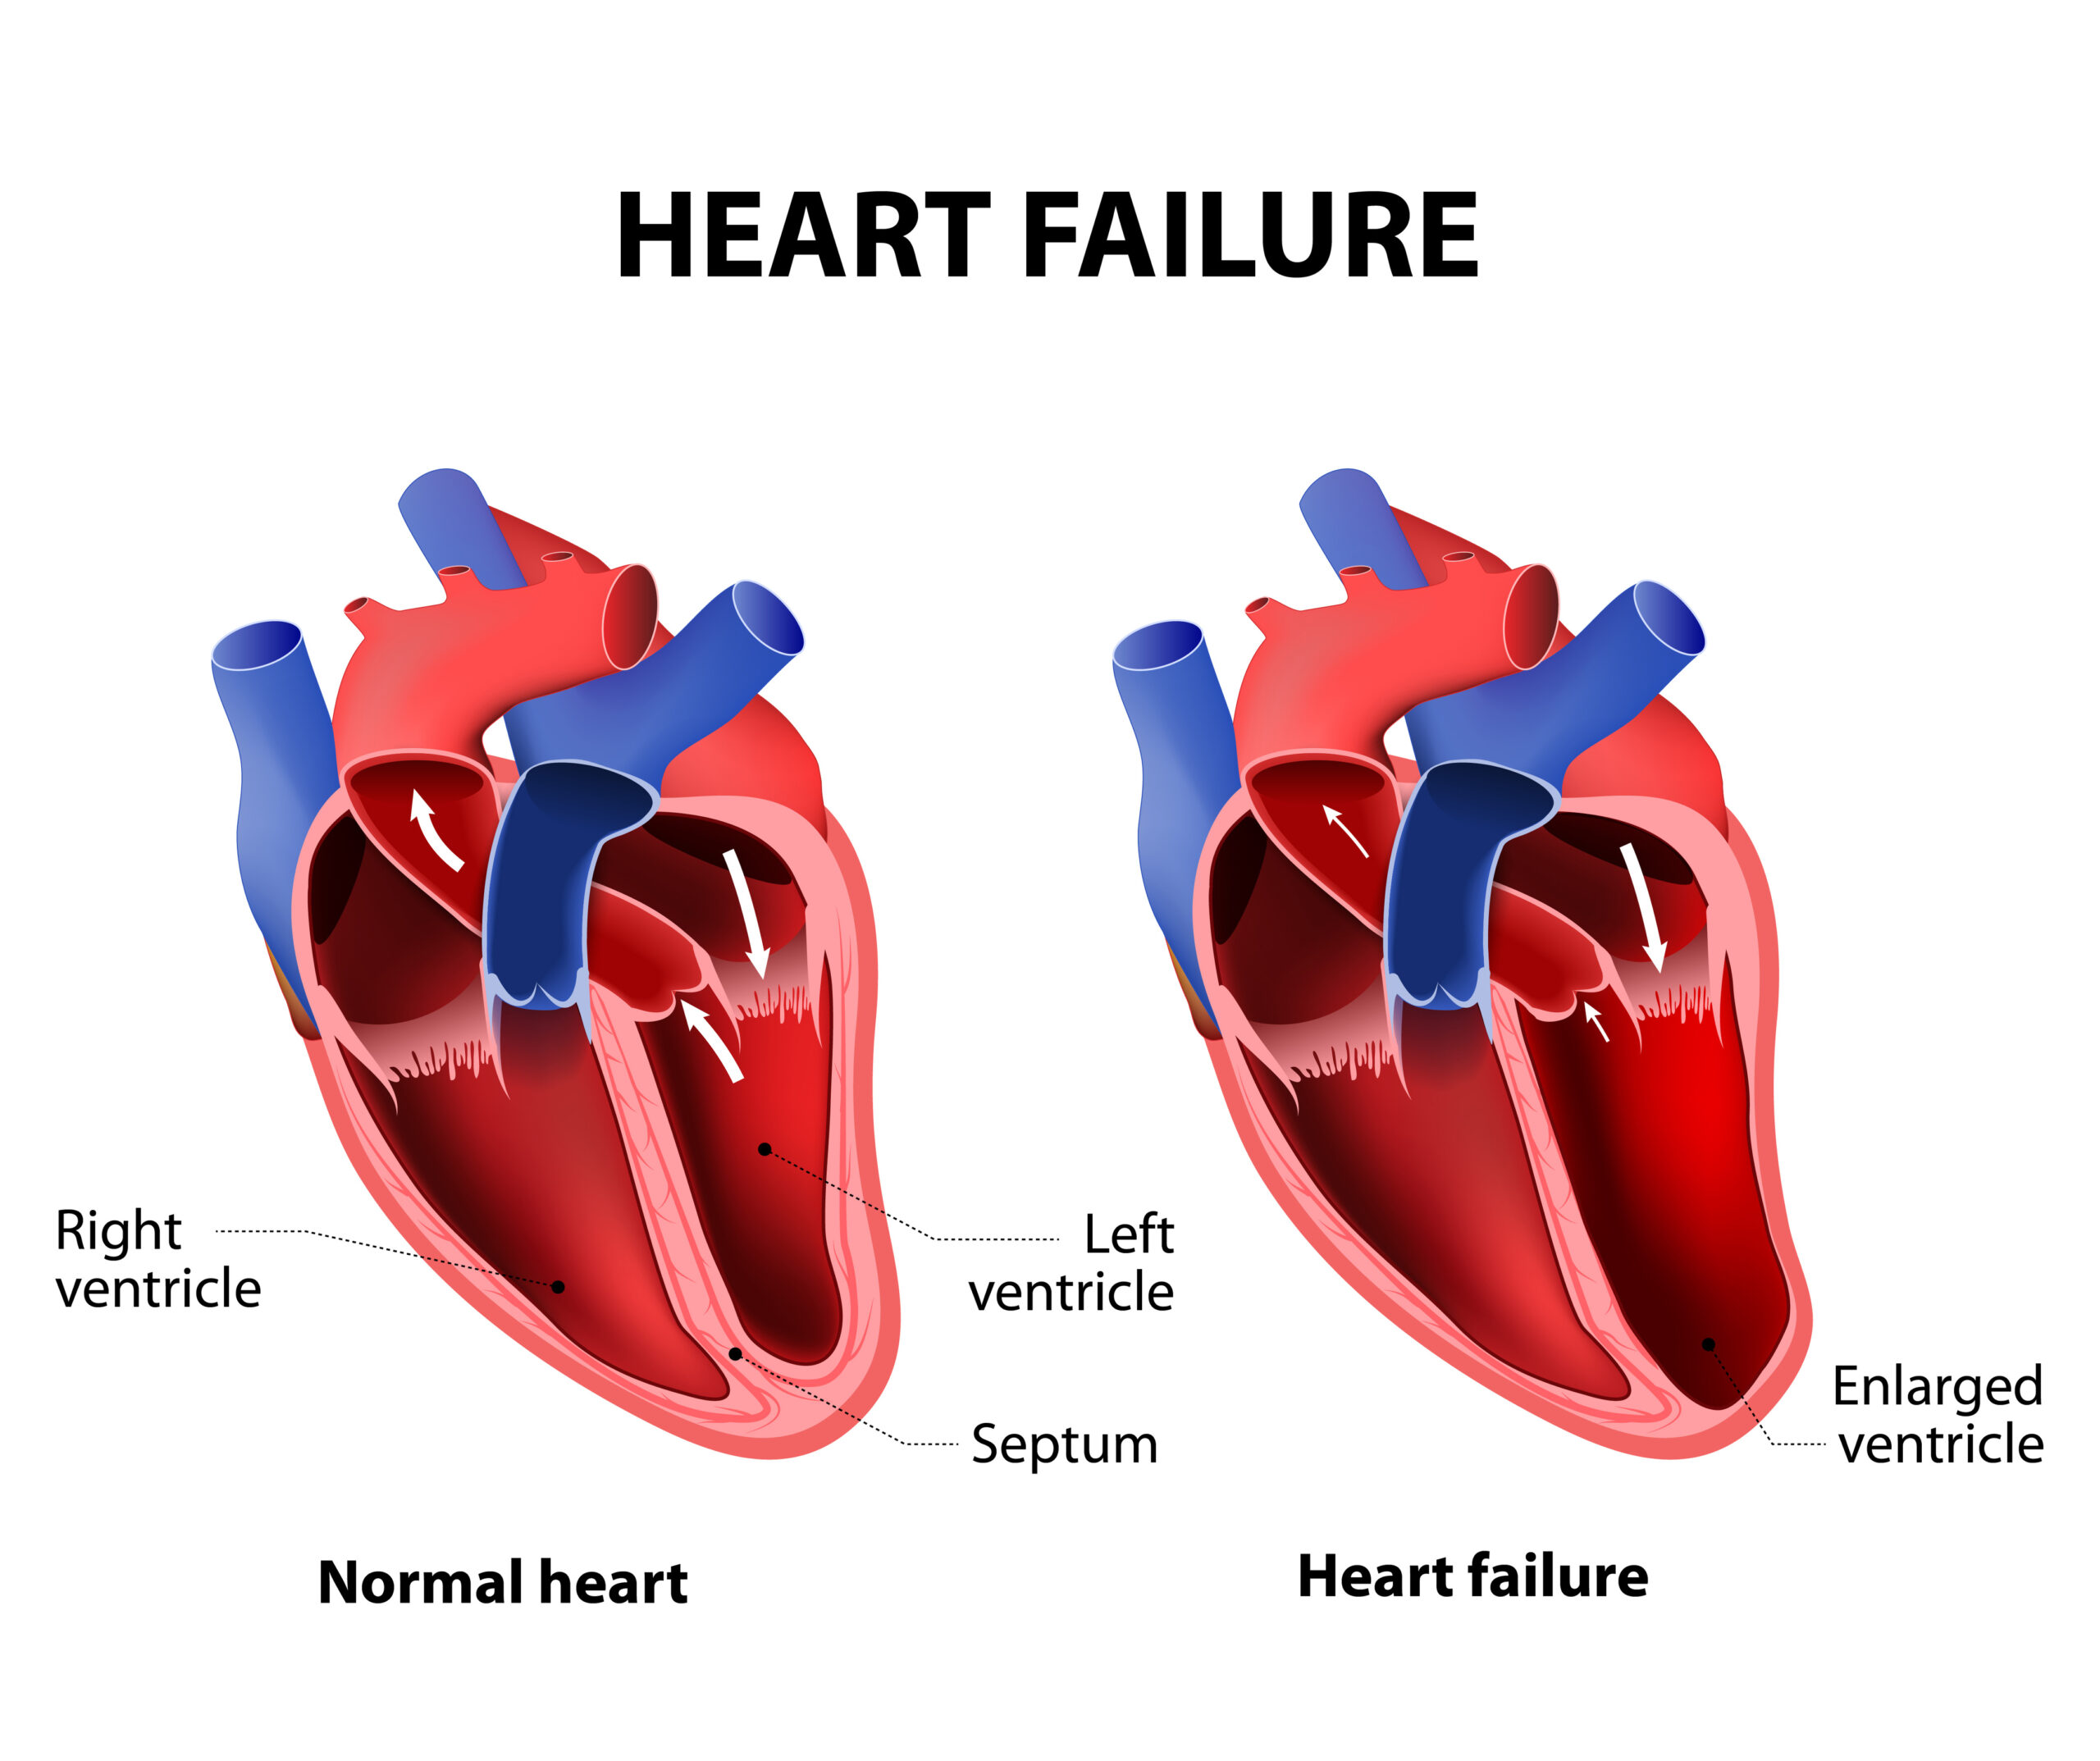 Diagram depicting the ventricles of a healthy heart versus a heart that has failed.